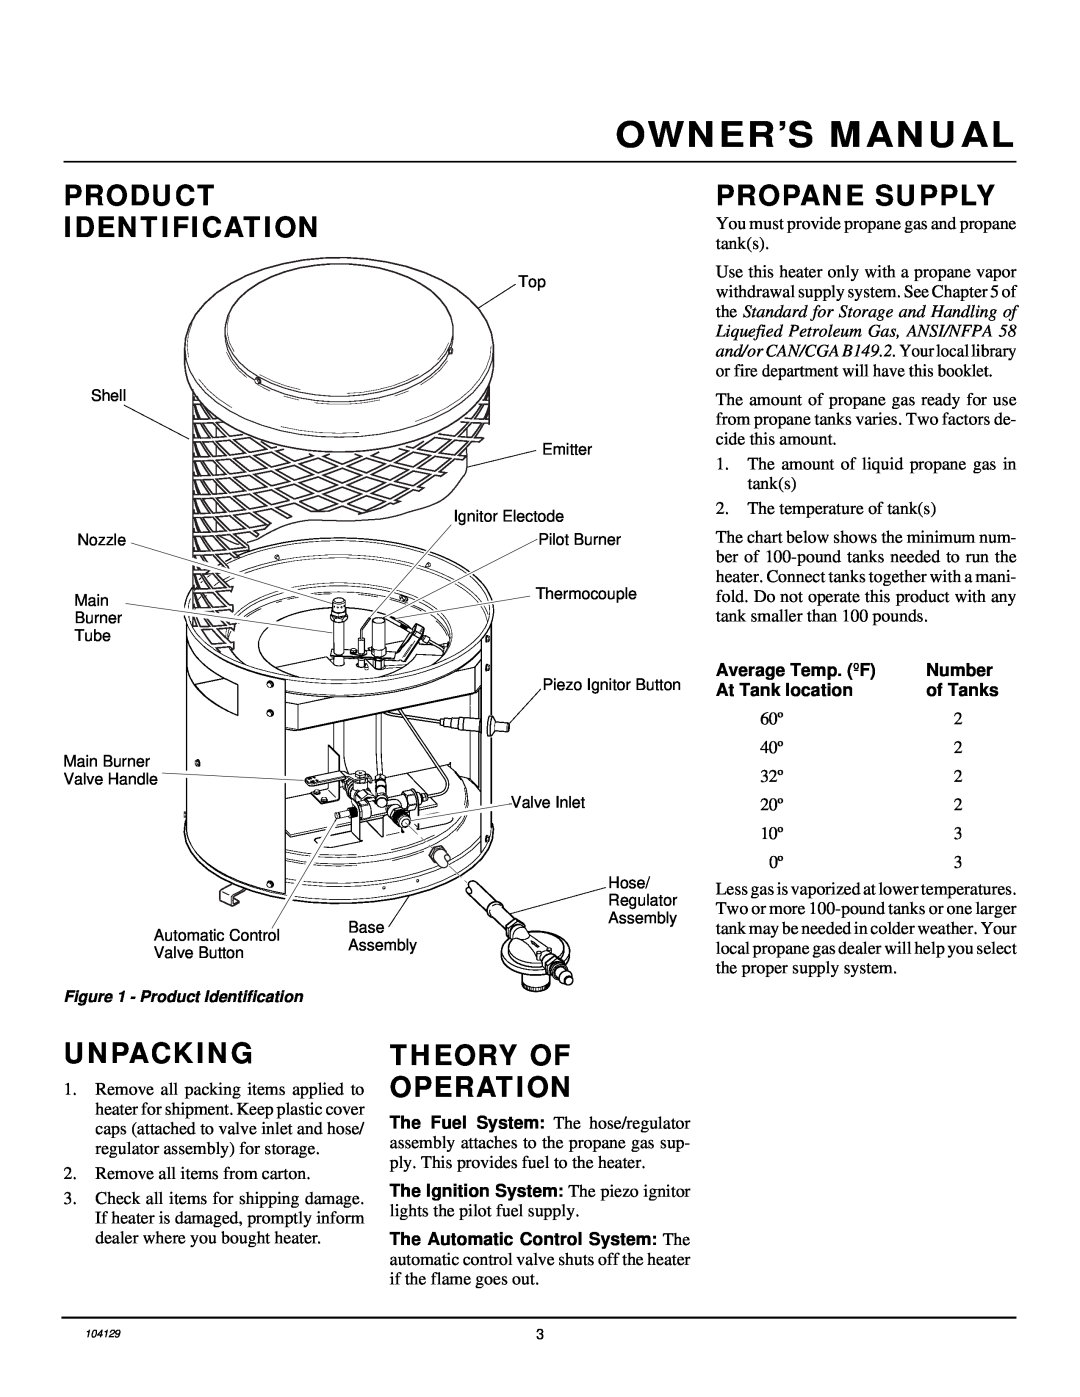 Desa TC100R owner manual Product Identification, Propane Supply, Unpacking, Theory Of Operation 